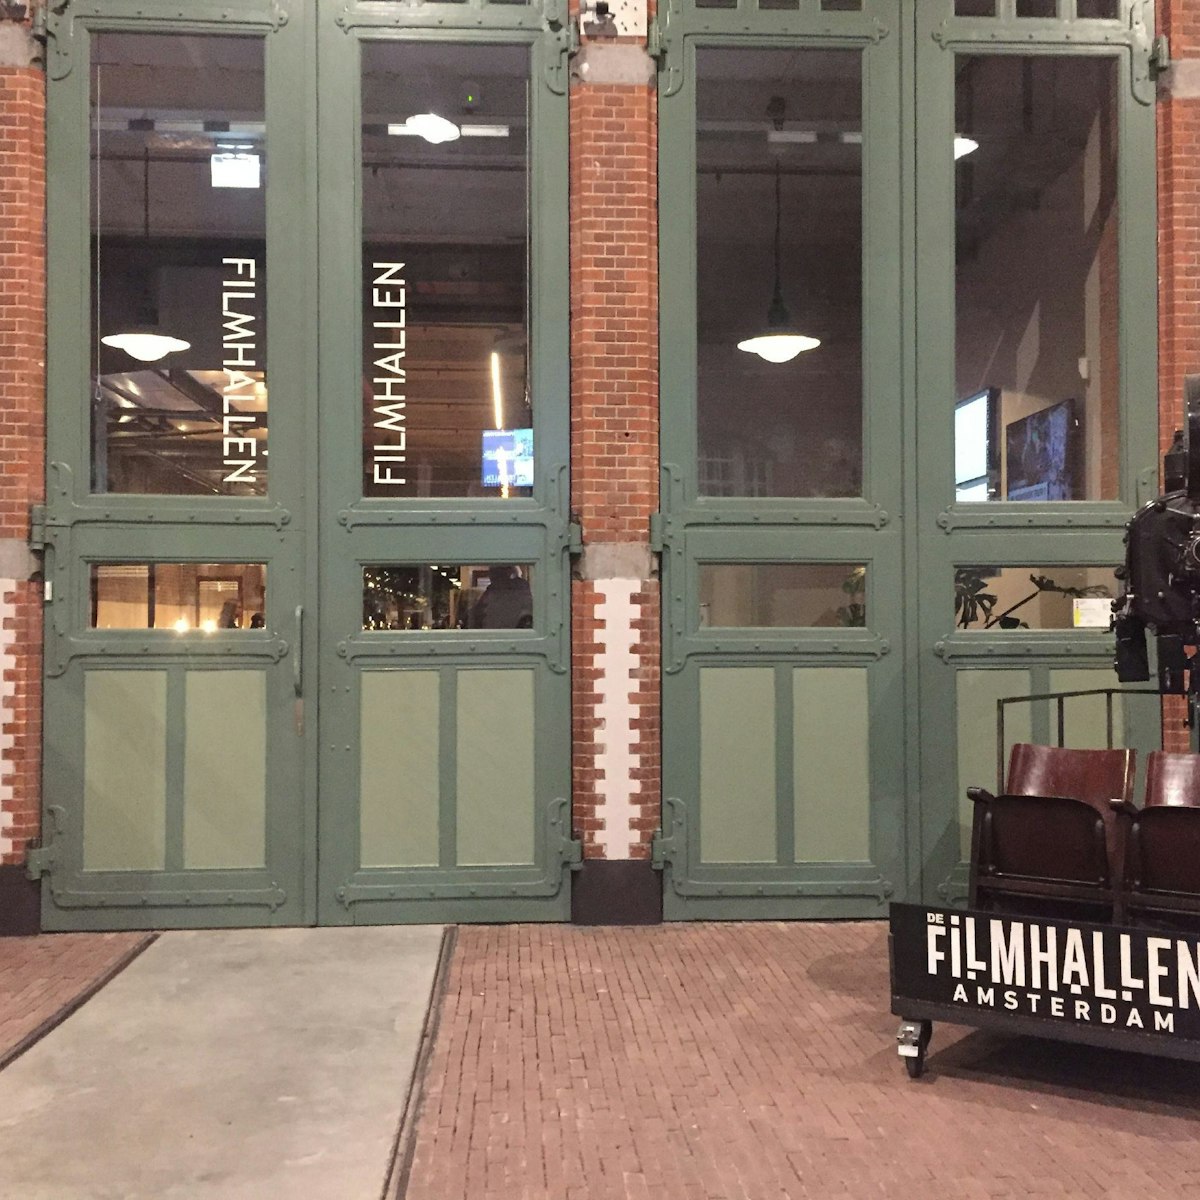 Catch a the latest releases or an art house production at Filmhallen, Amsterdam